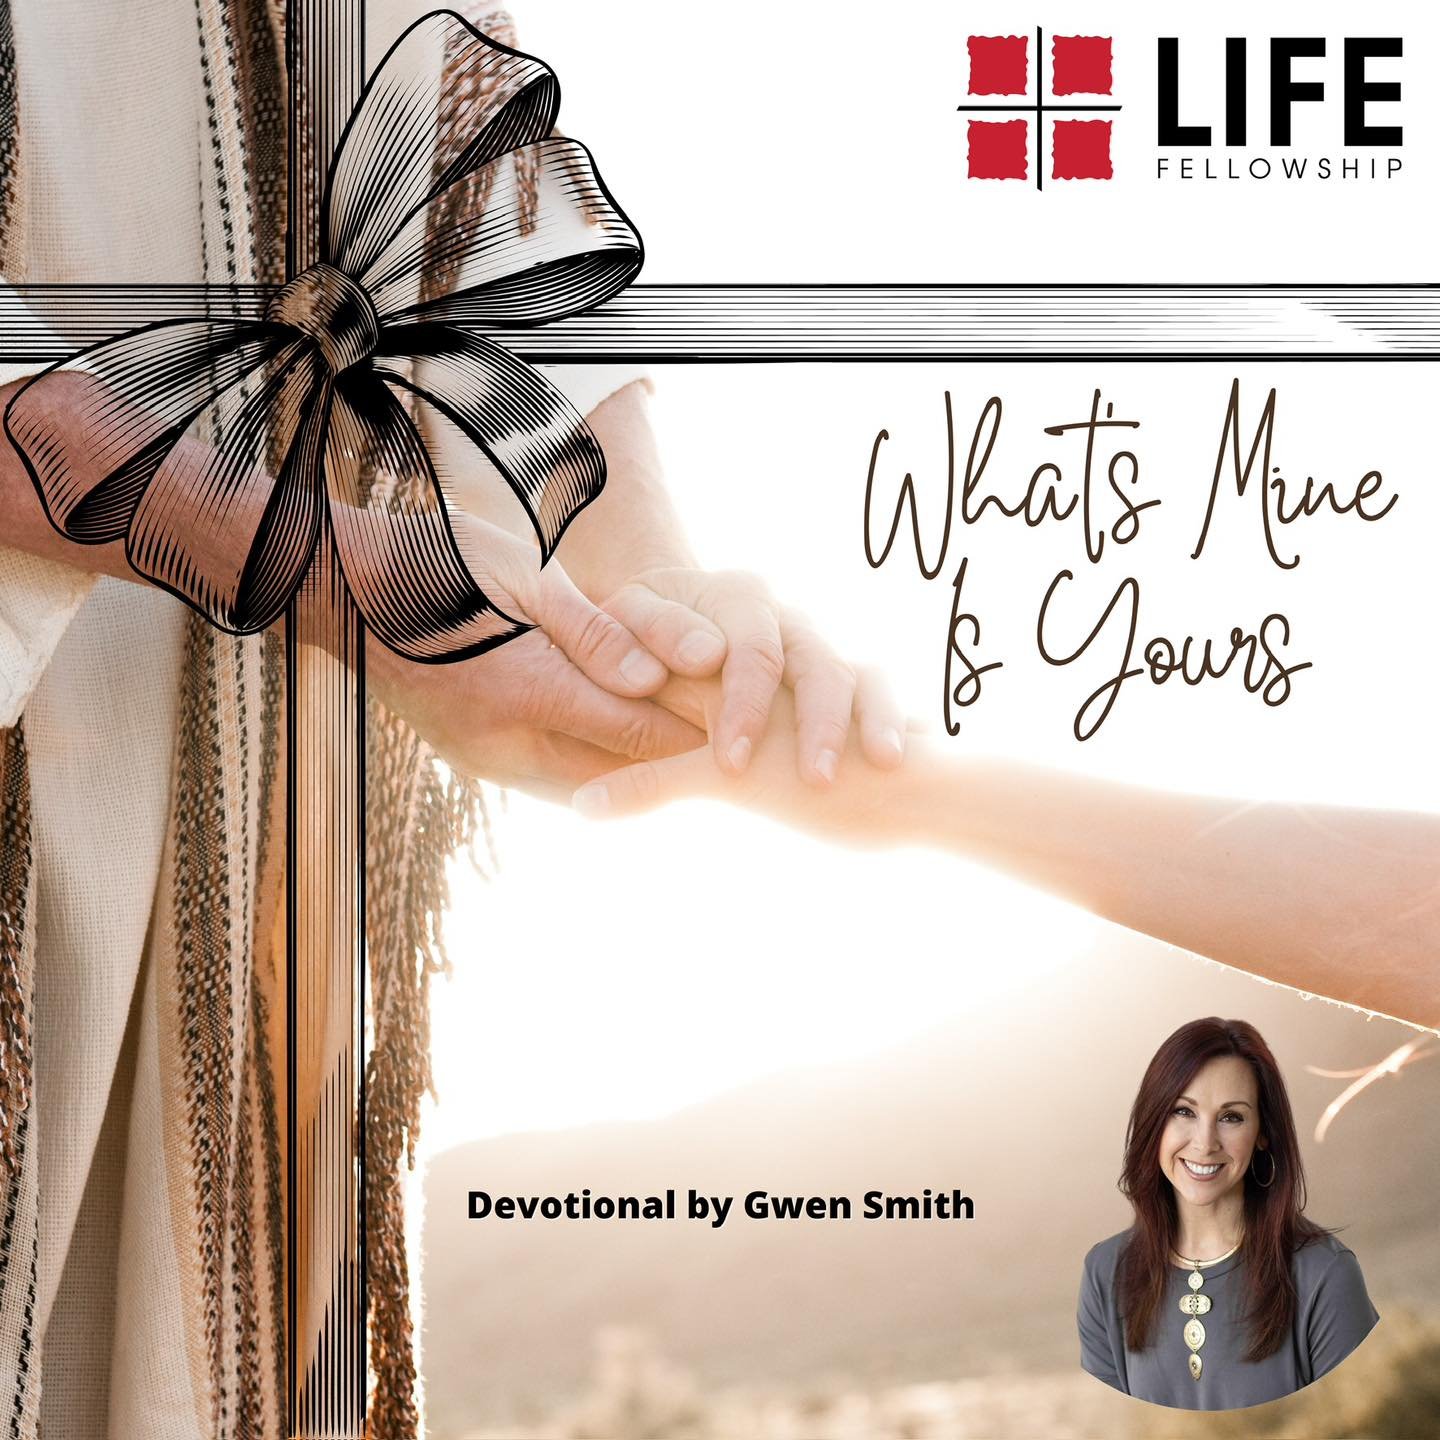 This week&rsquo;s devotional written by Gwen Smith highlights the importance of giving cheerfully. Read it now on the LIFE app or at lifecharlotte.com/devotional! 

#lifecharlotte #love #hope #lakenorman #prayer #serve #Gospel #jesus #church #Bible #